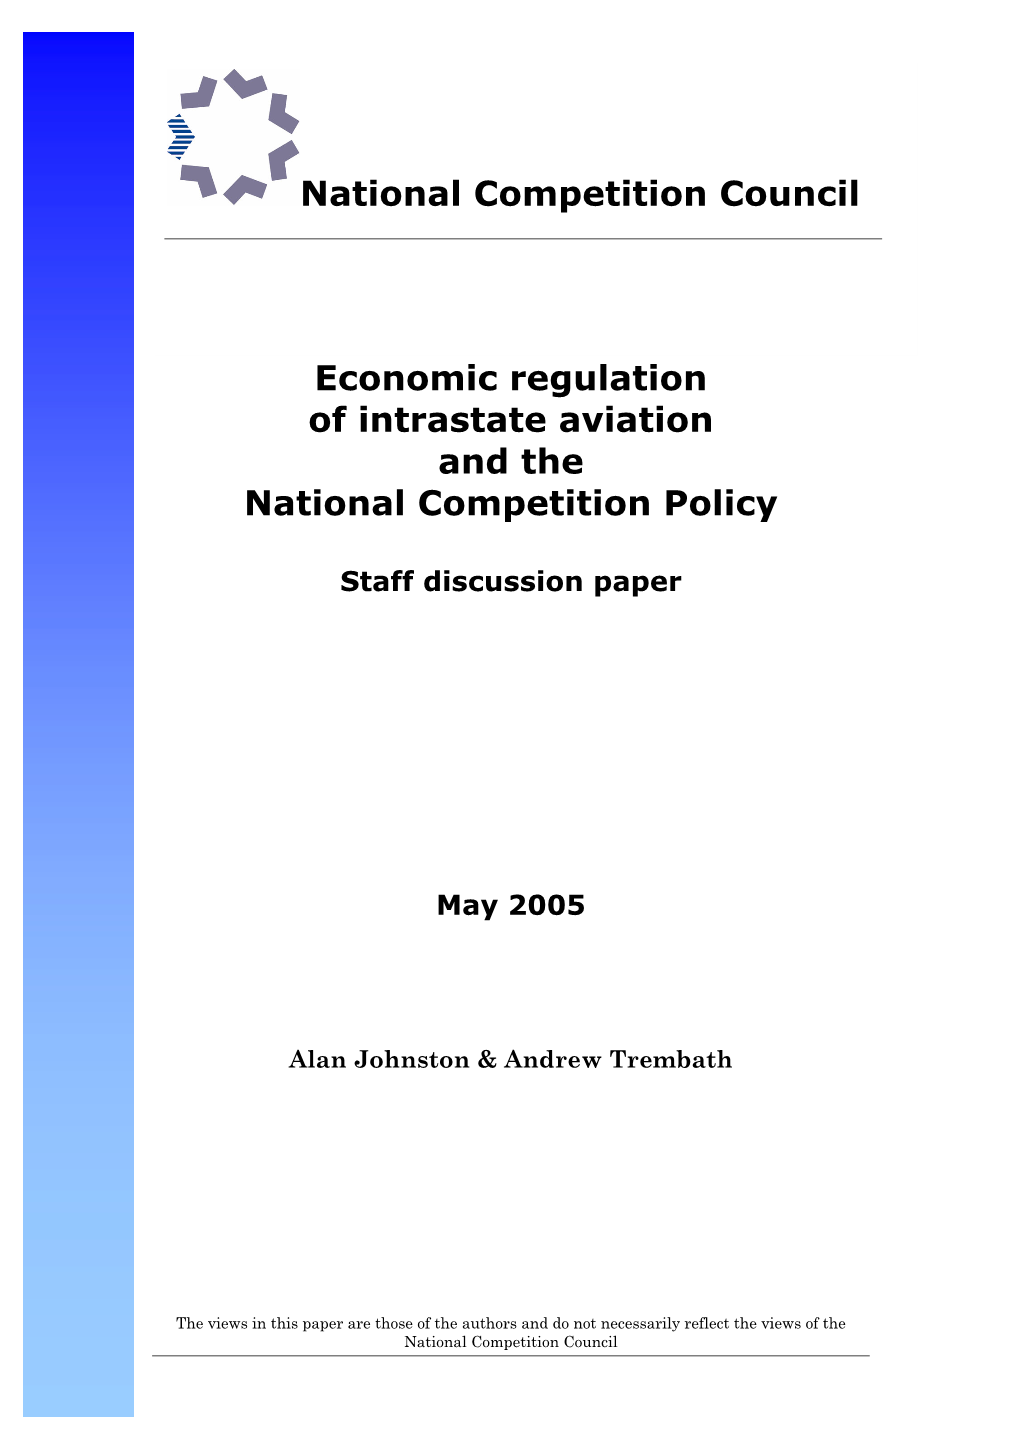 Economic Regulation of Intrastate Aviation and the National Competition Policy